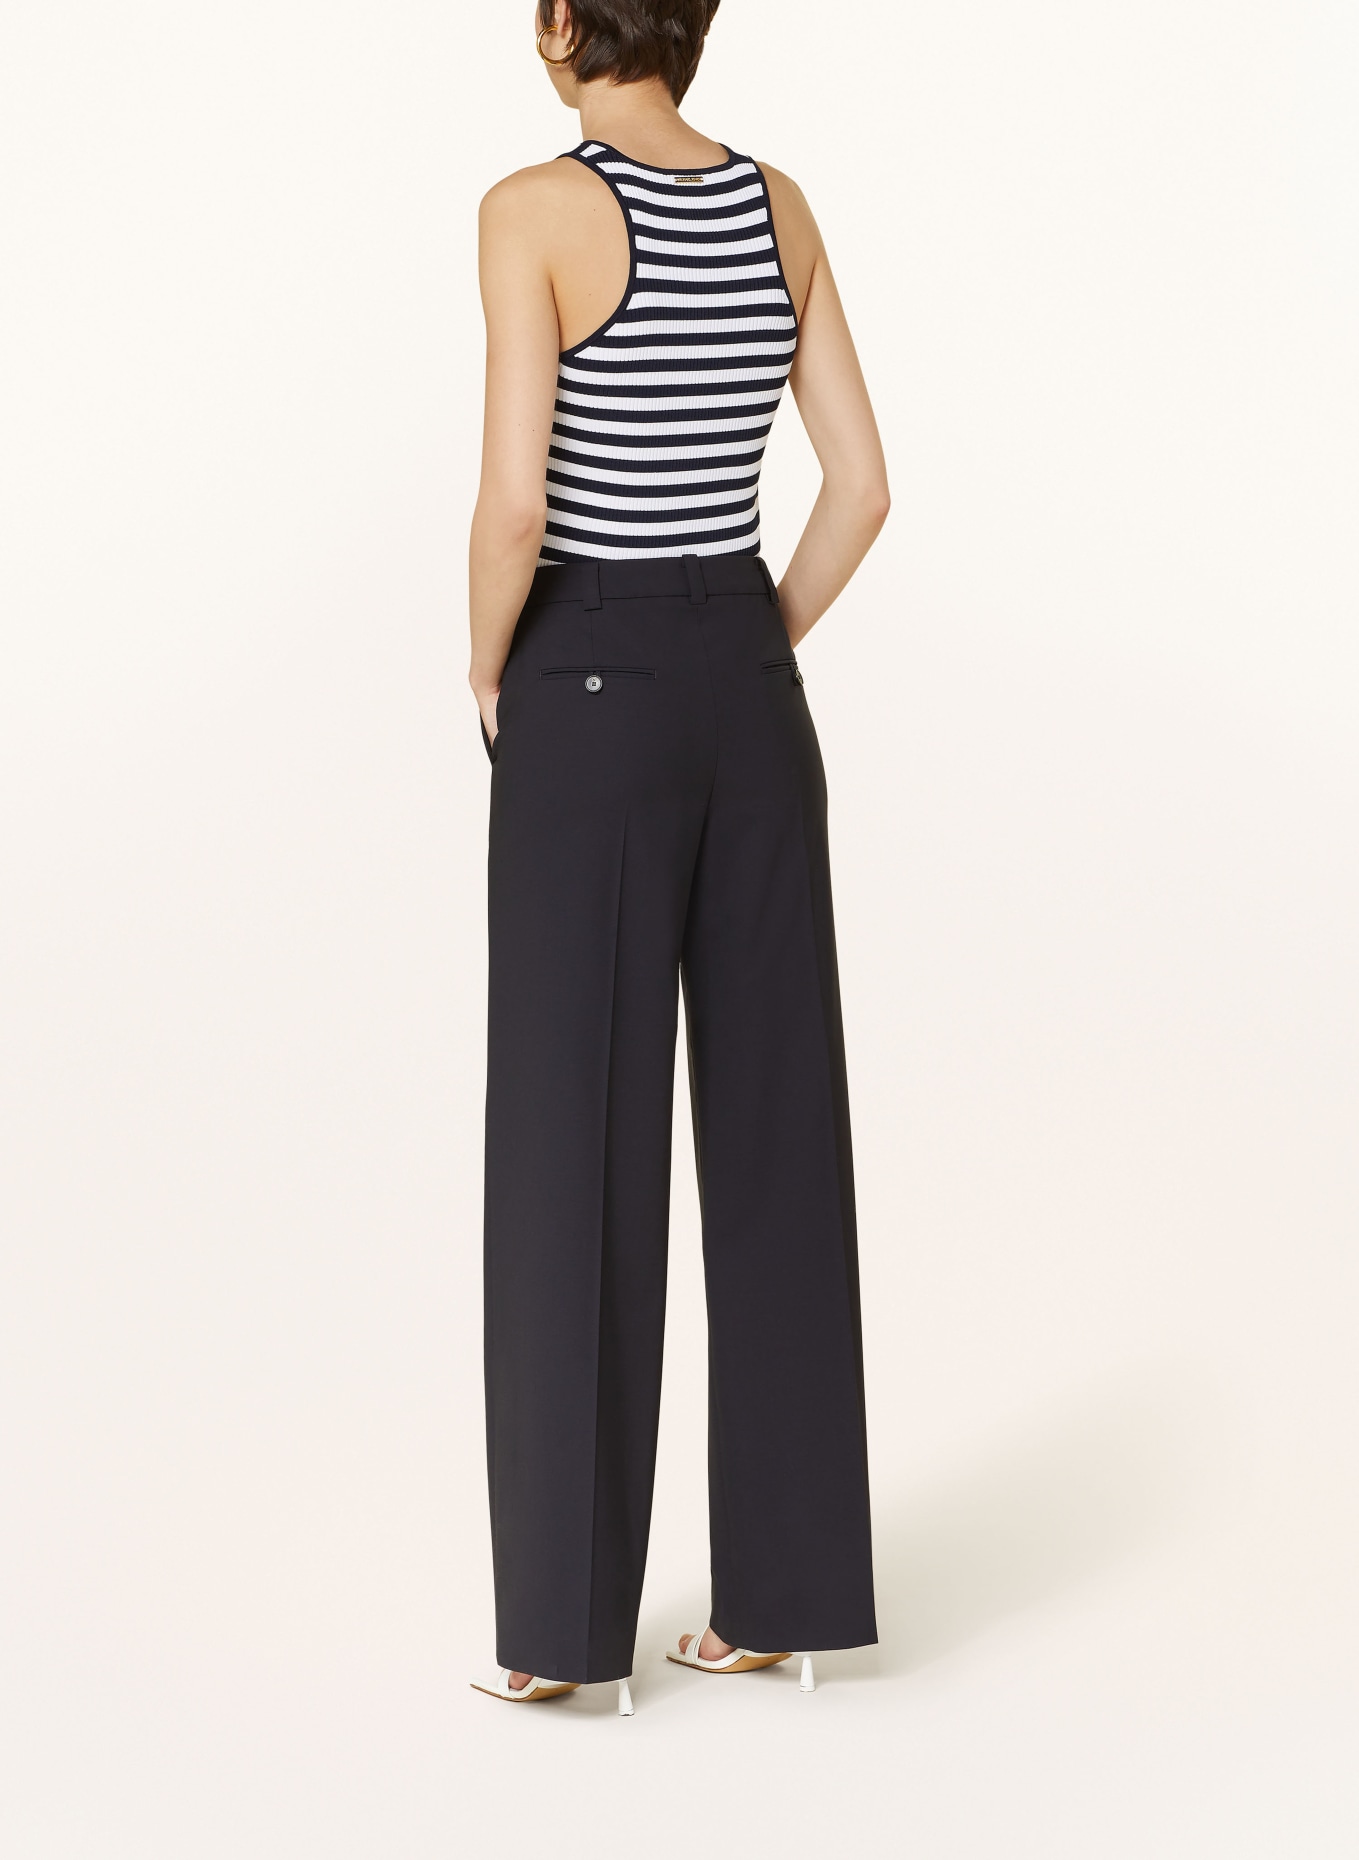 MICHAEL KORS Cropped knit top, Color: DARK BLUE/ WHITE (Image 3)